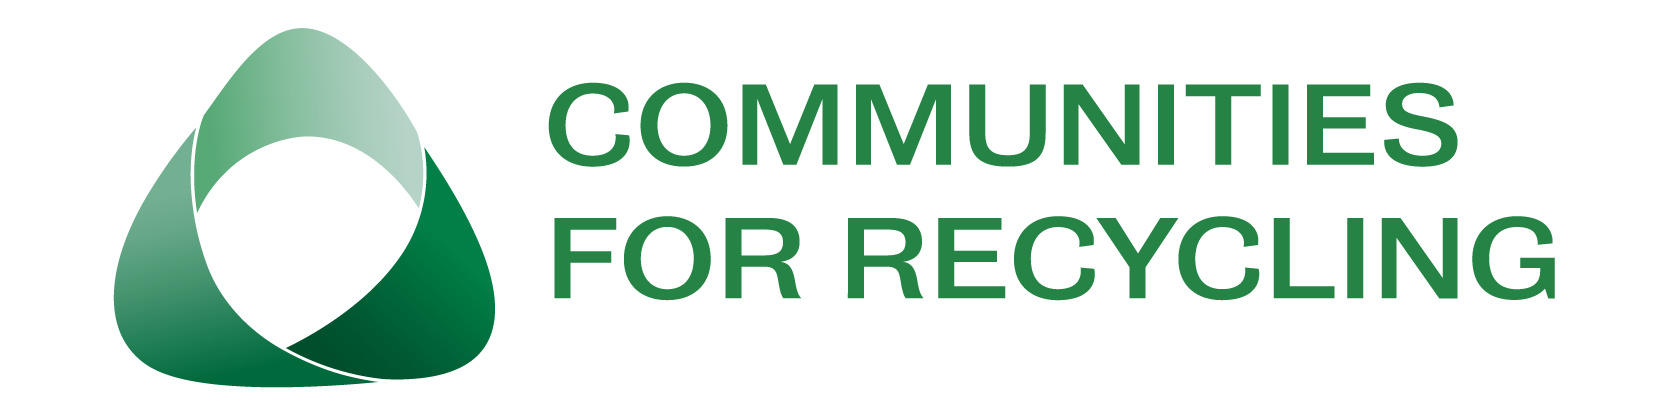 Communities for Recycling